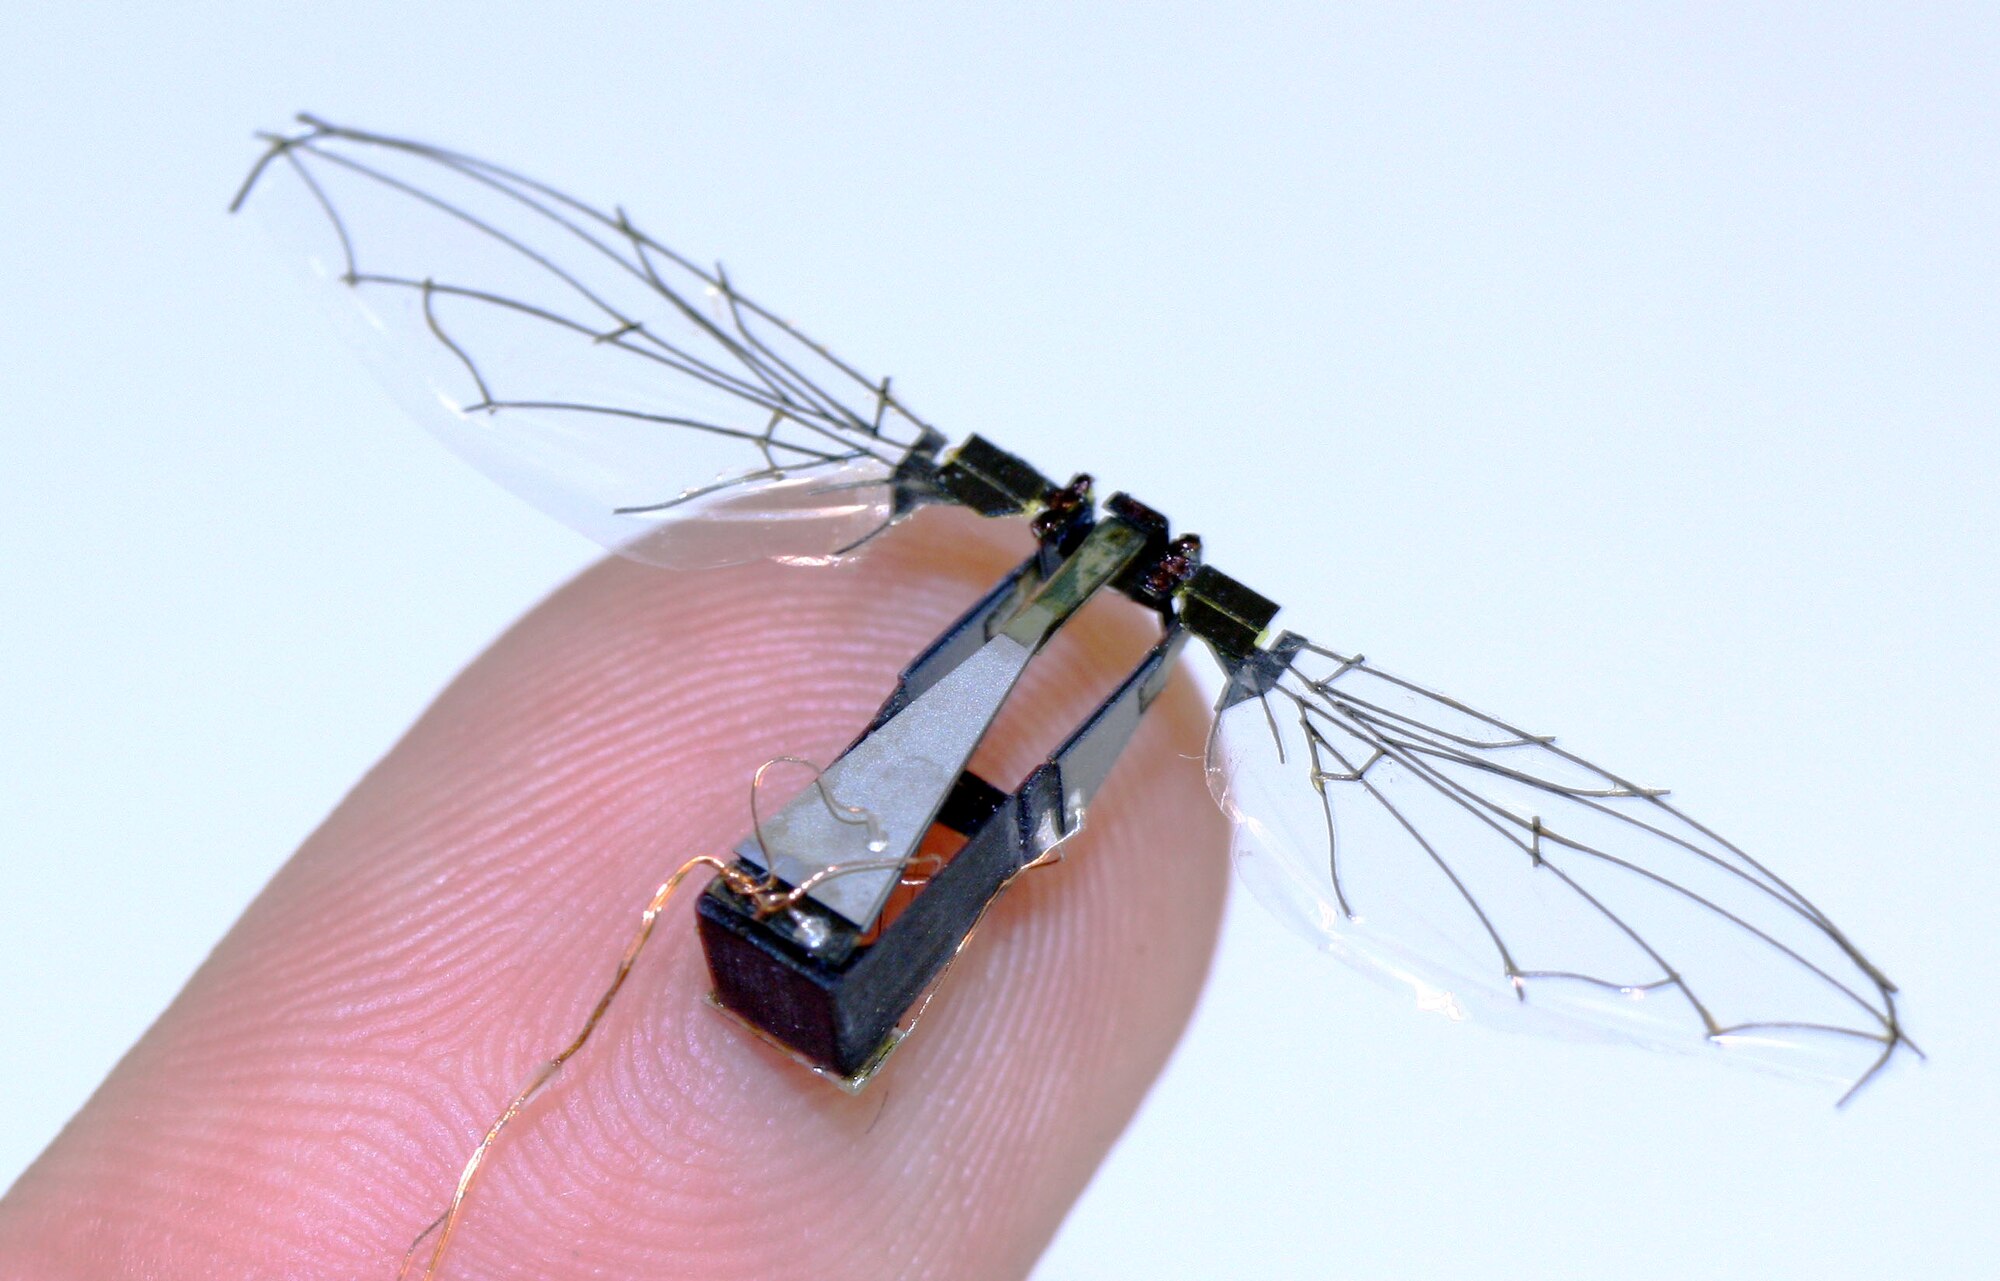 Recent prototype of the Harvard Microrobotic Fly, a three-centimeter wingspan flapping-wing robot. (Credit: Ben Finio, The Harvard Microrobotics Lab)